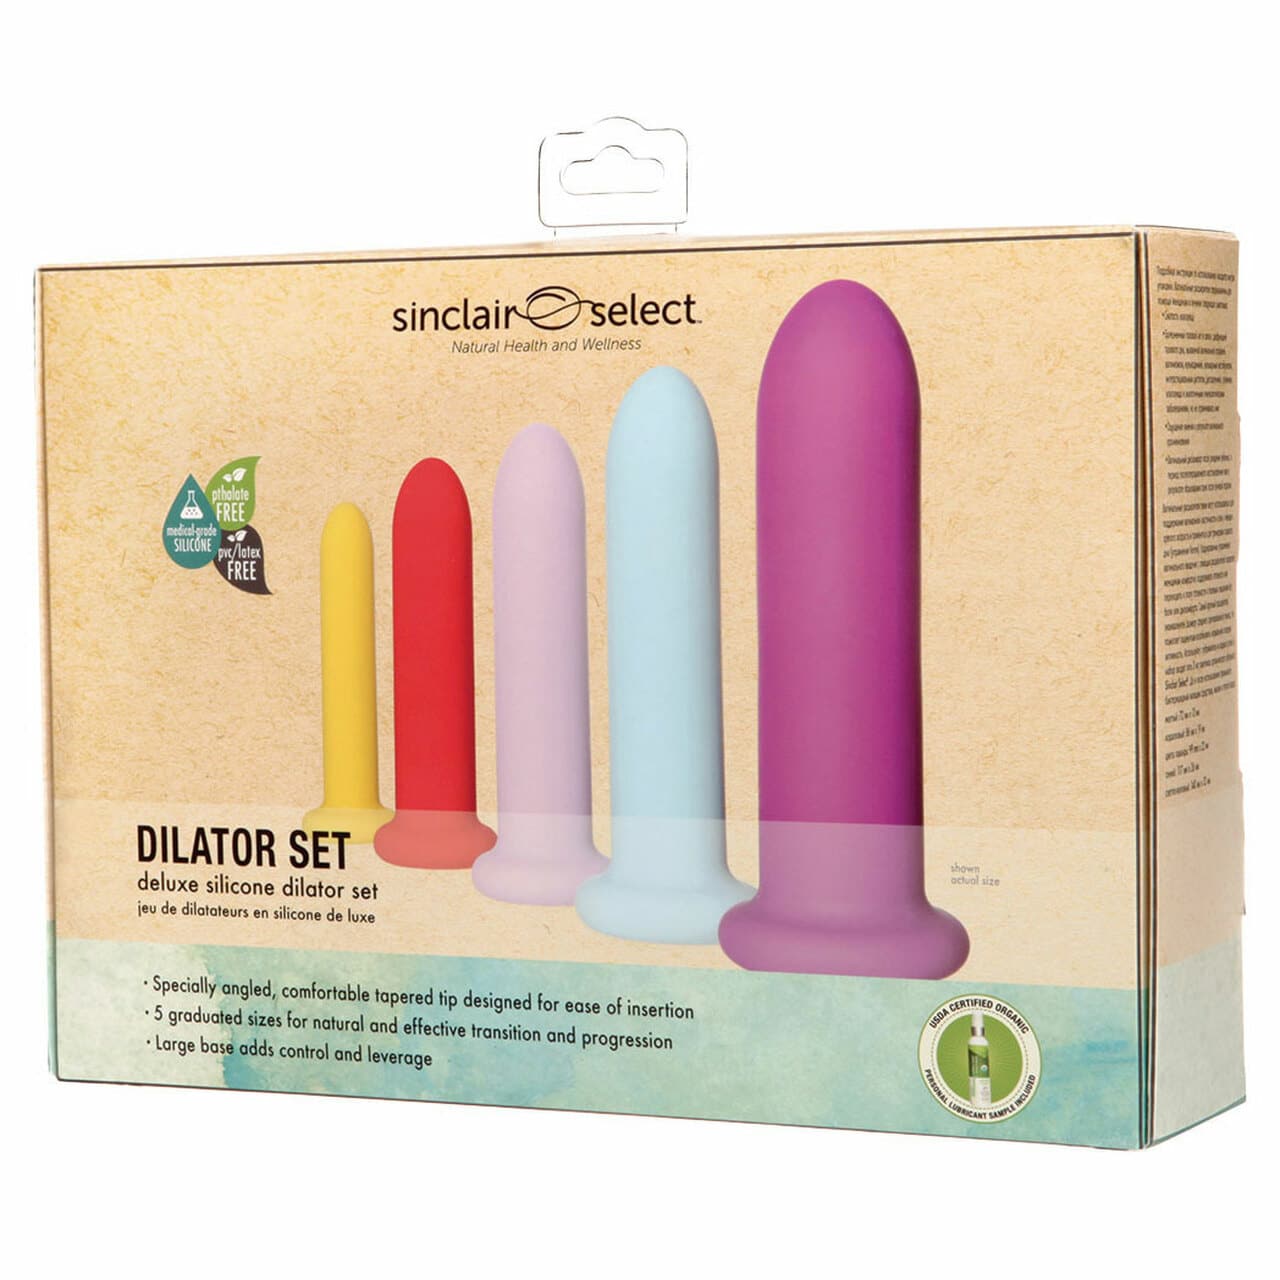 Sinclair Select Deluxe Silicone Dilator Set. Slide 2